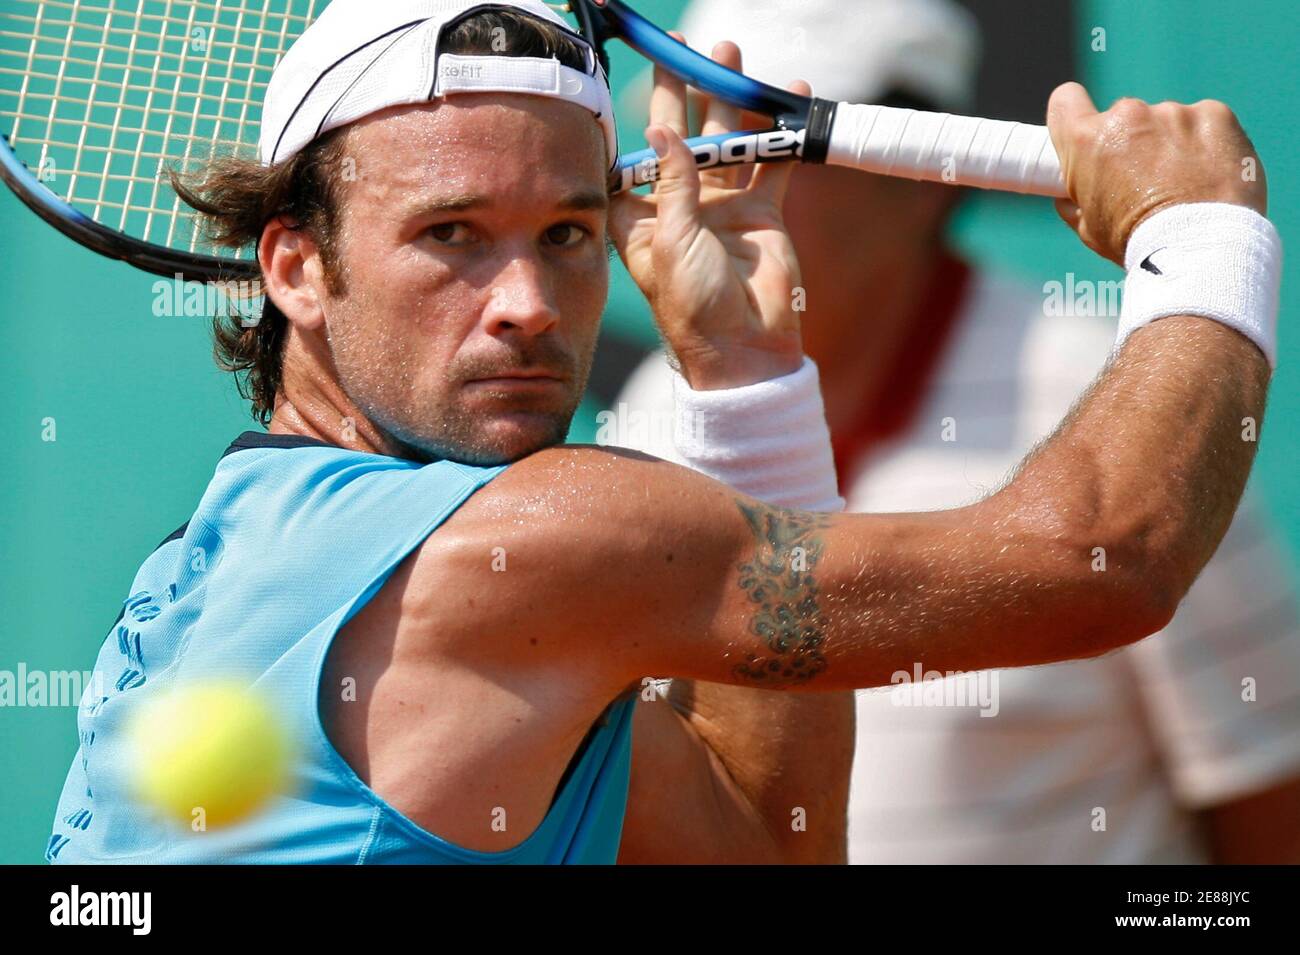 Spain's Carlos Moya returns the ball to Argentina's Juan Pablo Brzezicki at the French Open tennis tournament at Roland Garros in Paris June 2, 2007.  REUTERS/Charles Platiau (FRANCE) Stock Photo